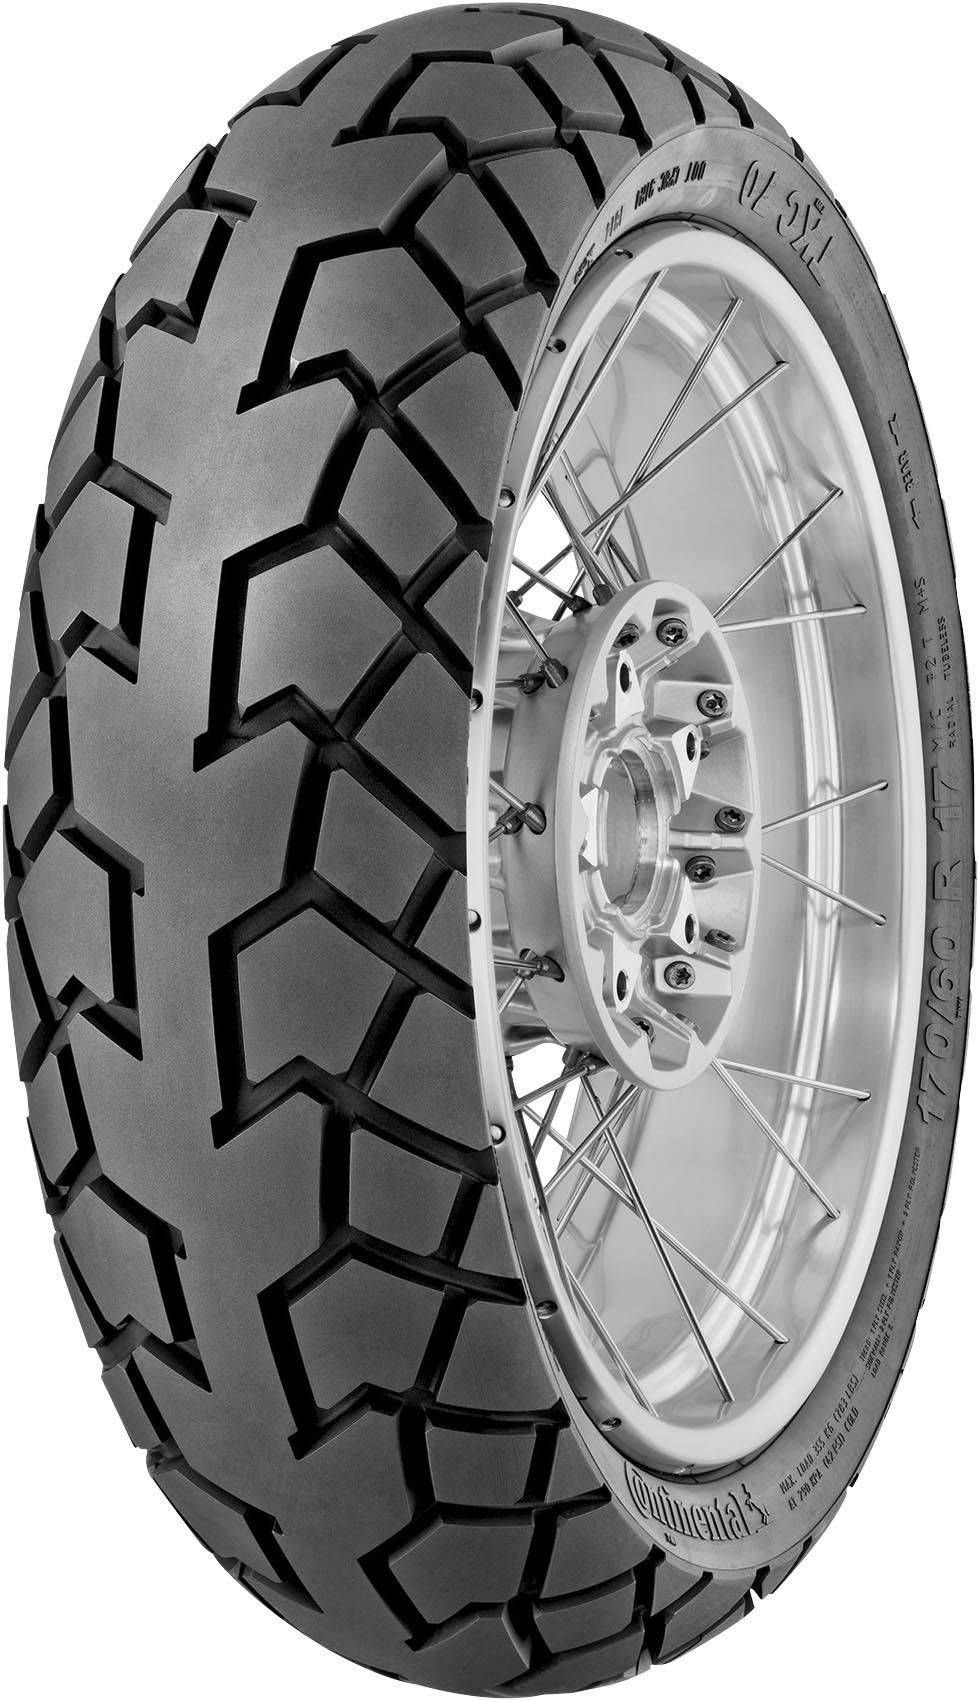 product_type-moto_tires CONTINENTAL TKC70R 130/80 R17 65S